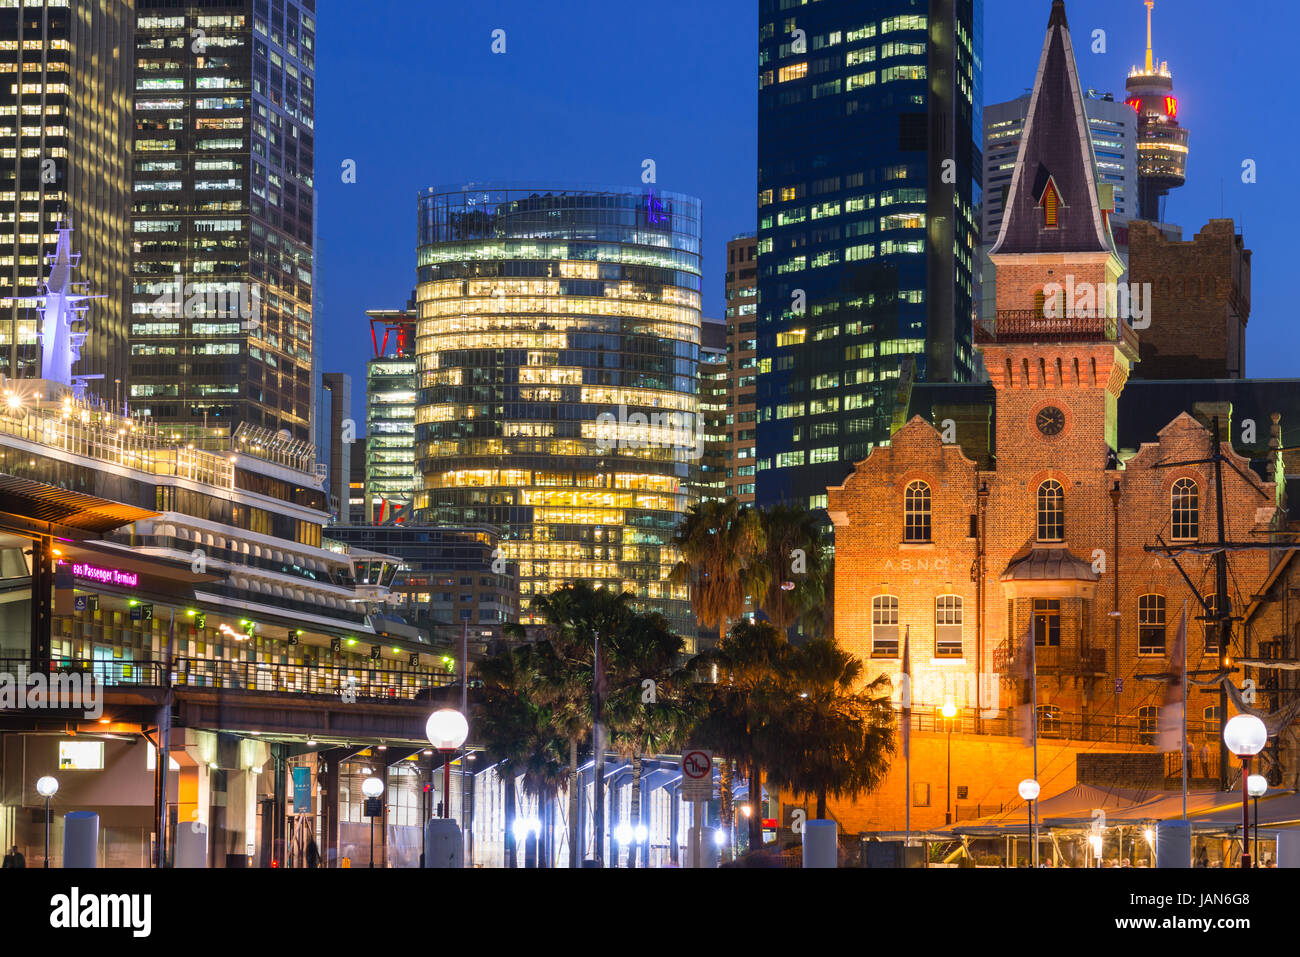 Old warehouses after dark at Campbell's Cove Jetty in Sydney, Australia Stock Photo